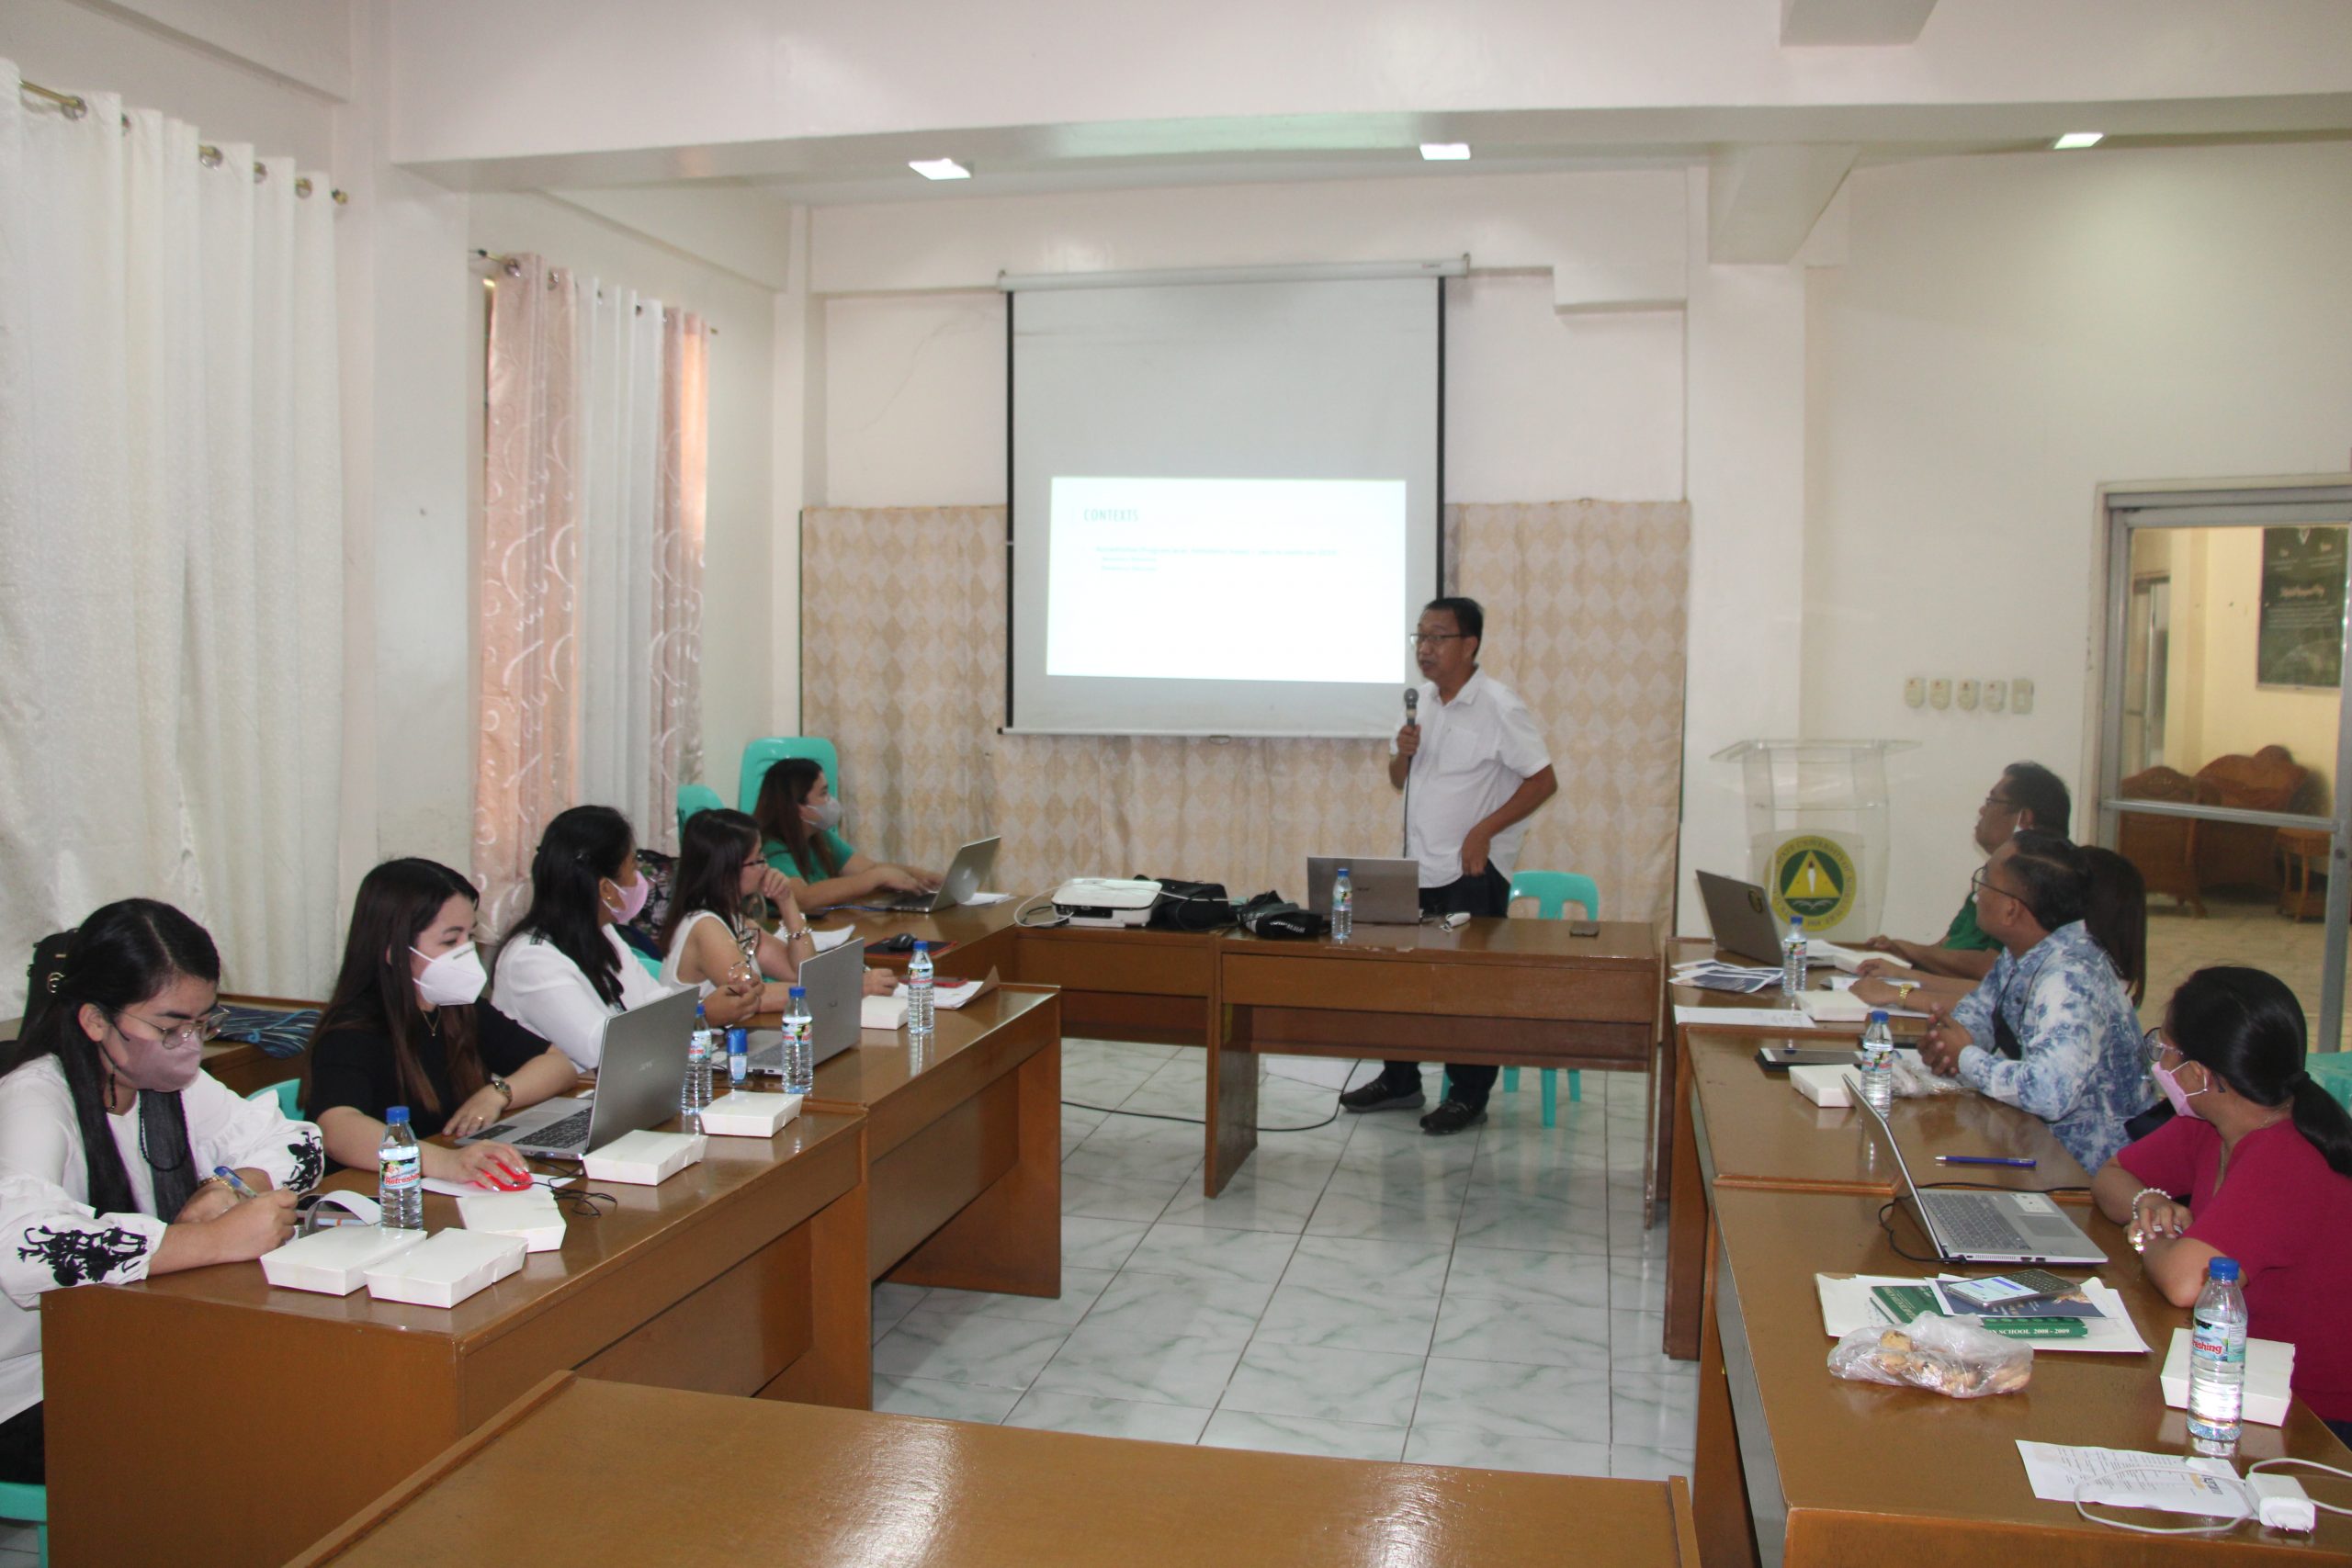 CDE HOLDS ROOT-CAUSE ROUNDTABLE DISCUSSION CUM WORKSHOP FOR RESEARCH-BASED EXTENSION PROGRAMS